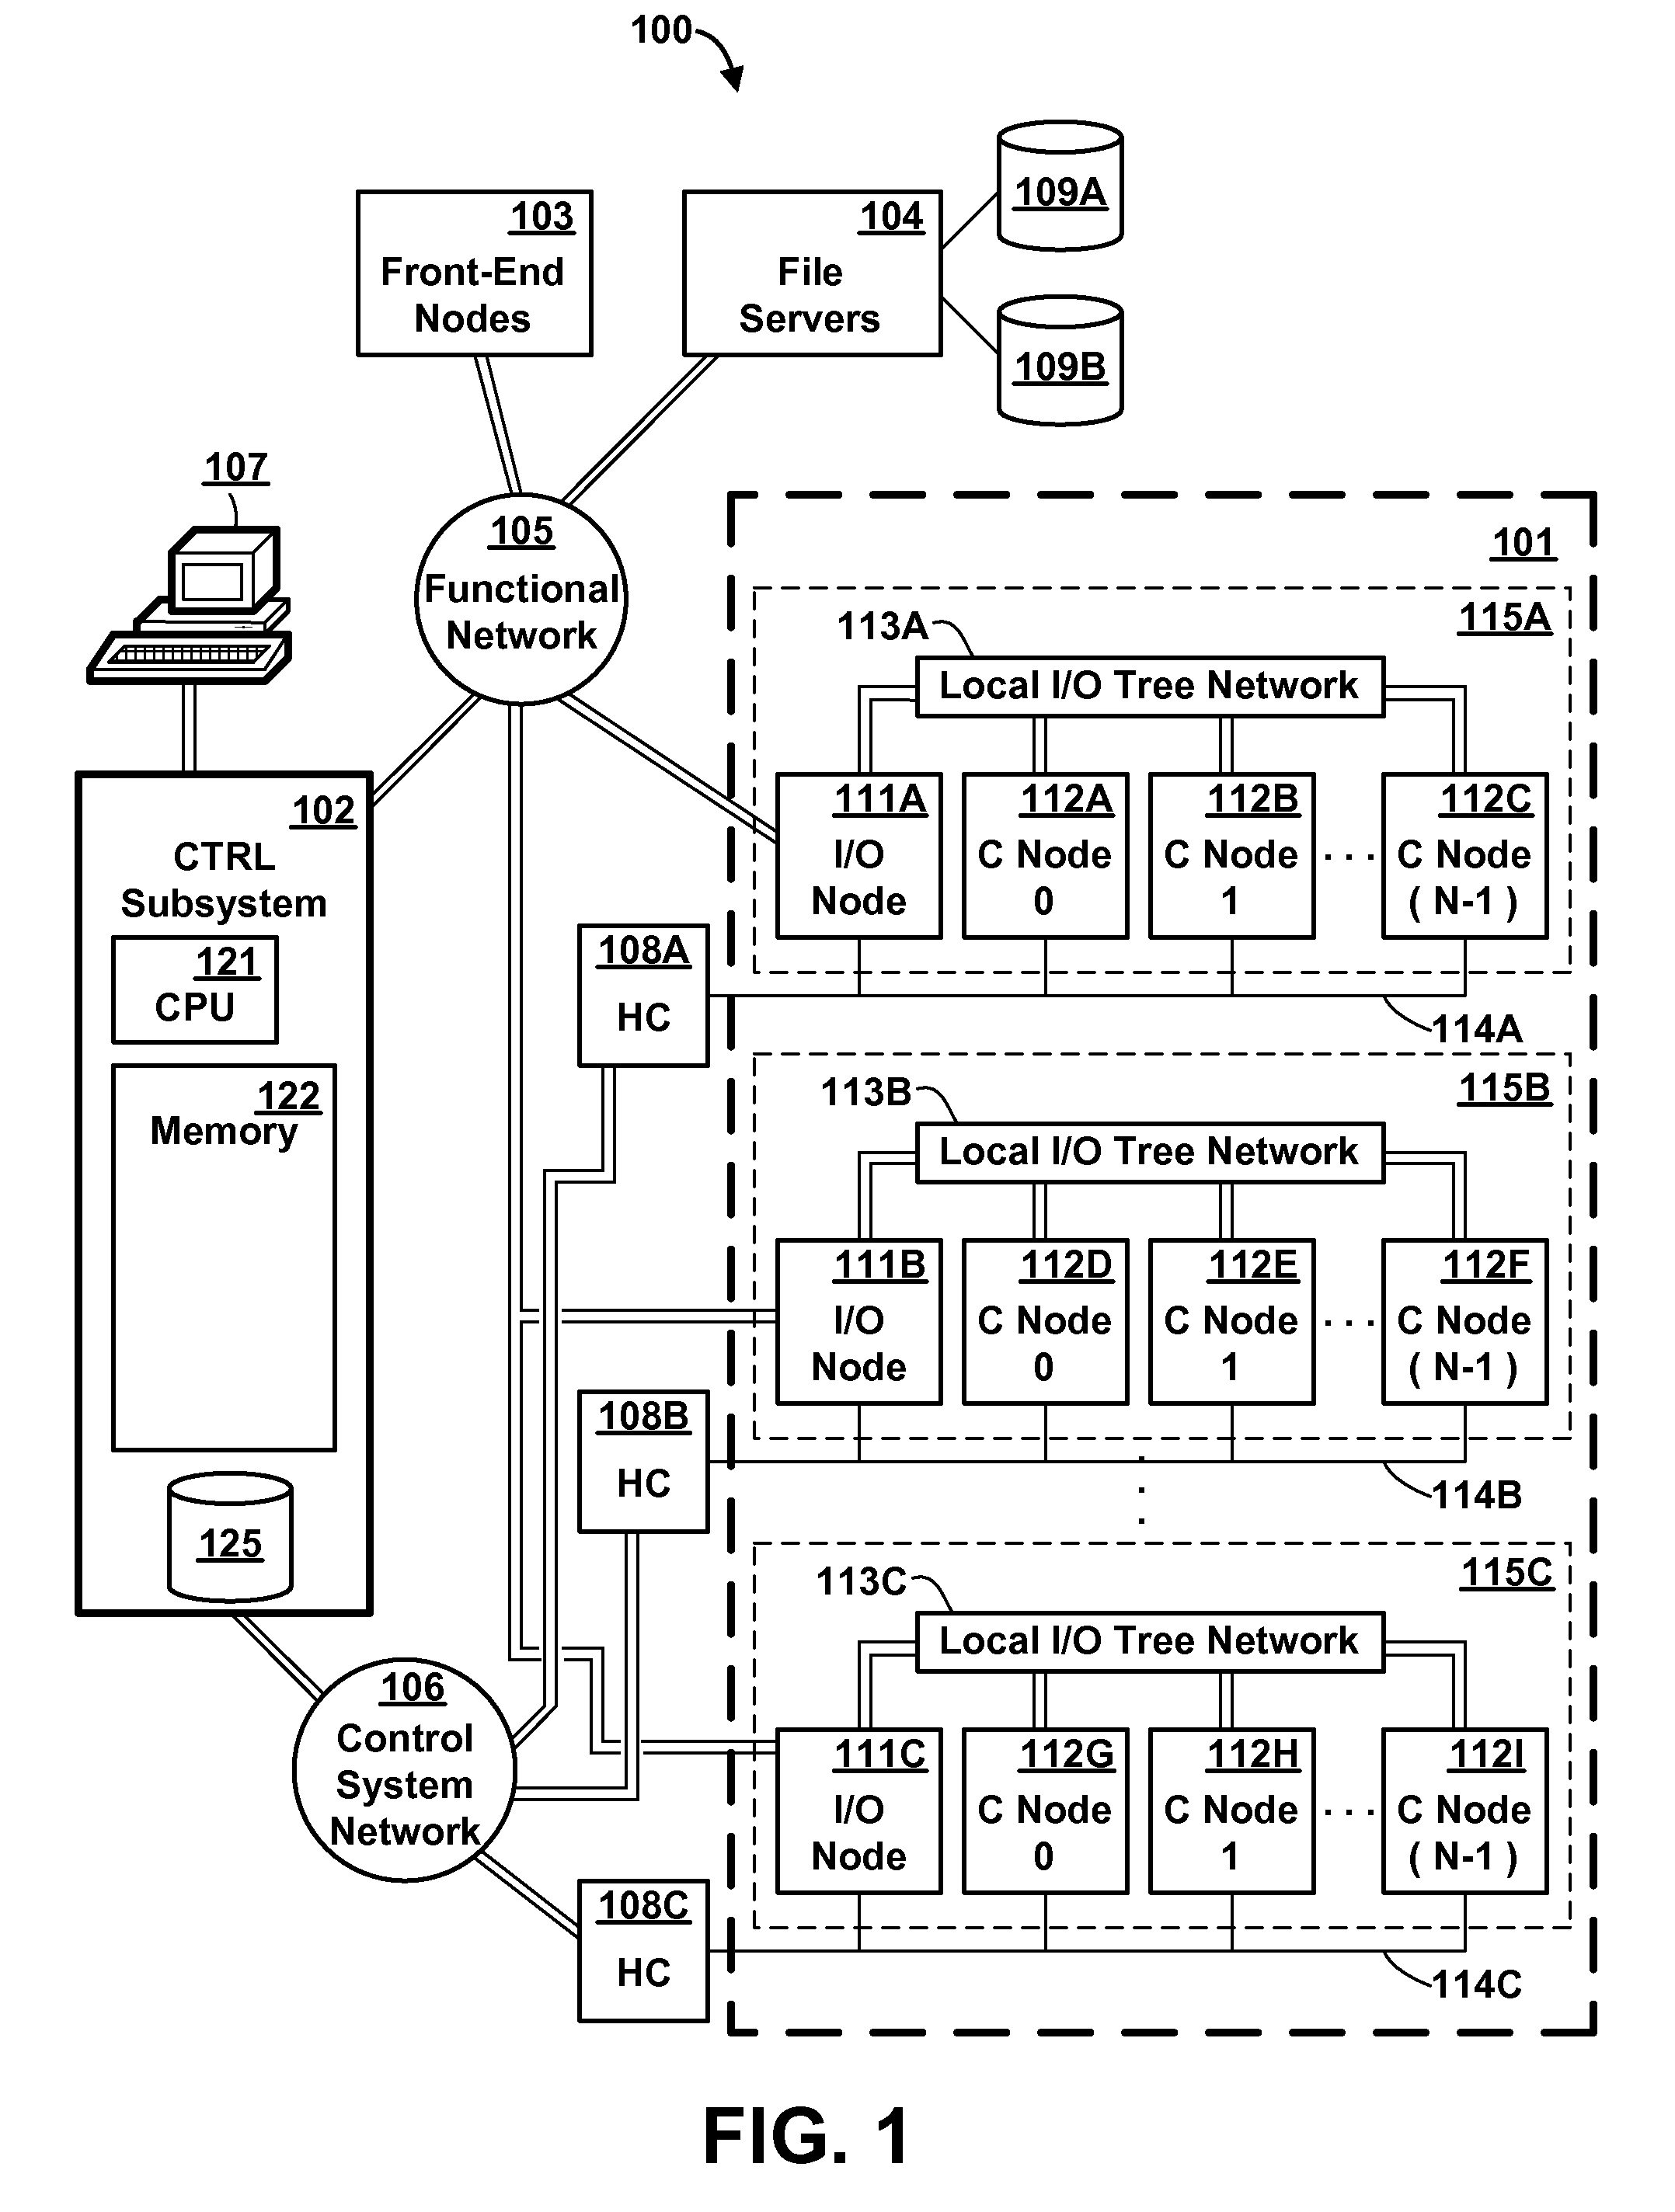 Memory Request/Grant Daemons in Virtual Nodes for Moving Subdivided Local Memory Space from VN to VN in Nodes of a Massively Parallel Computer System